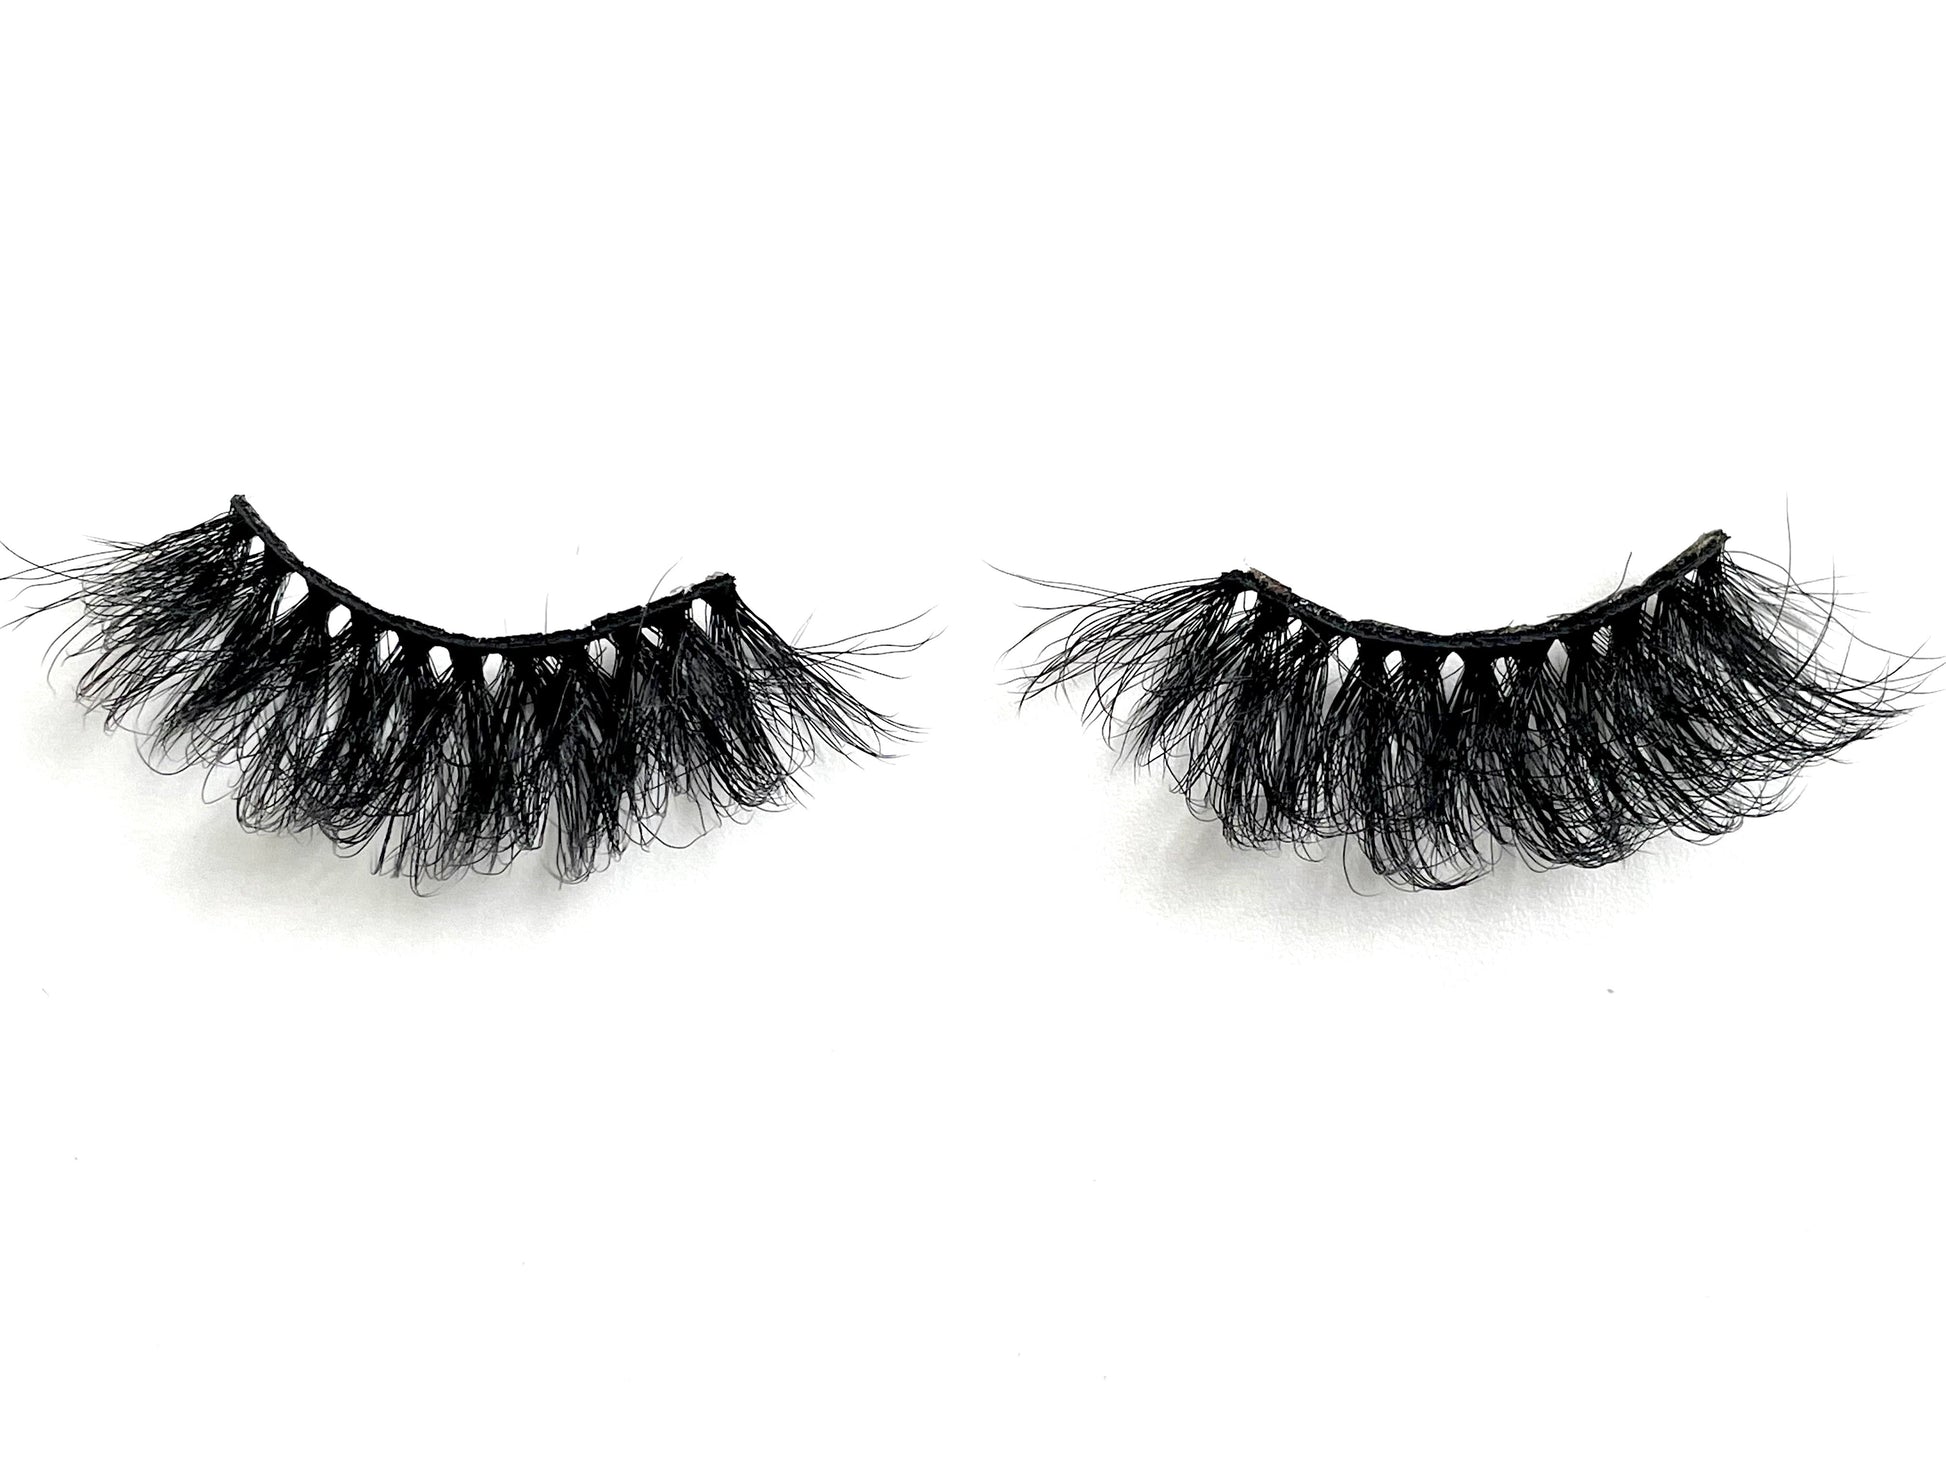 These 5D premium faux mink lashes are 25mm in length. They are soft, lightweight and very comfortable to wear on the lids. The flexible cotton lash band, makes the application process a breeze. Feisty lashes are suitable for dramatic eye looks and will make your eyes pop. They are not for timid lash wearers. You can wear this reusable style up to 25 times if handled with care.